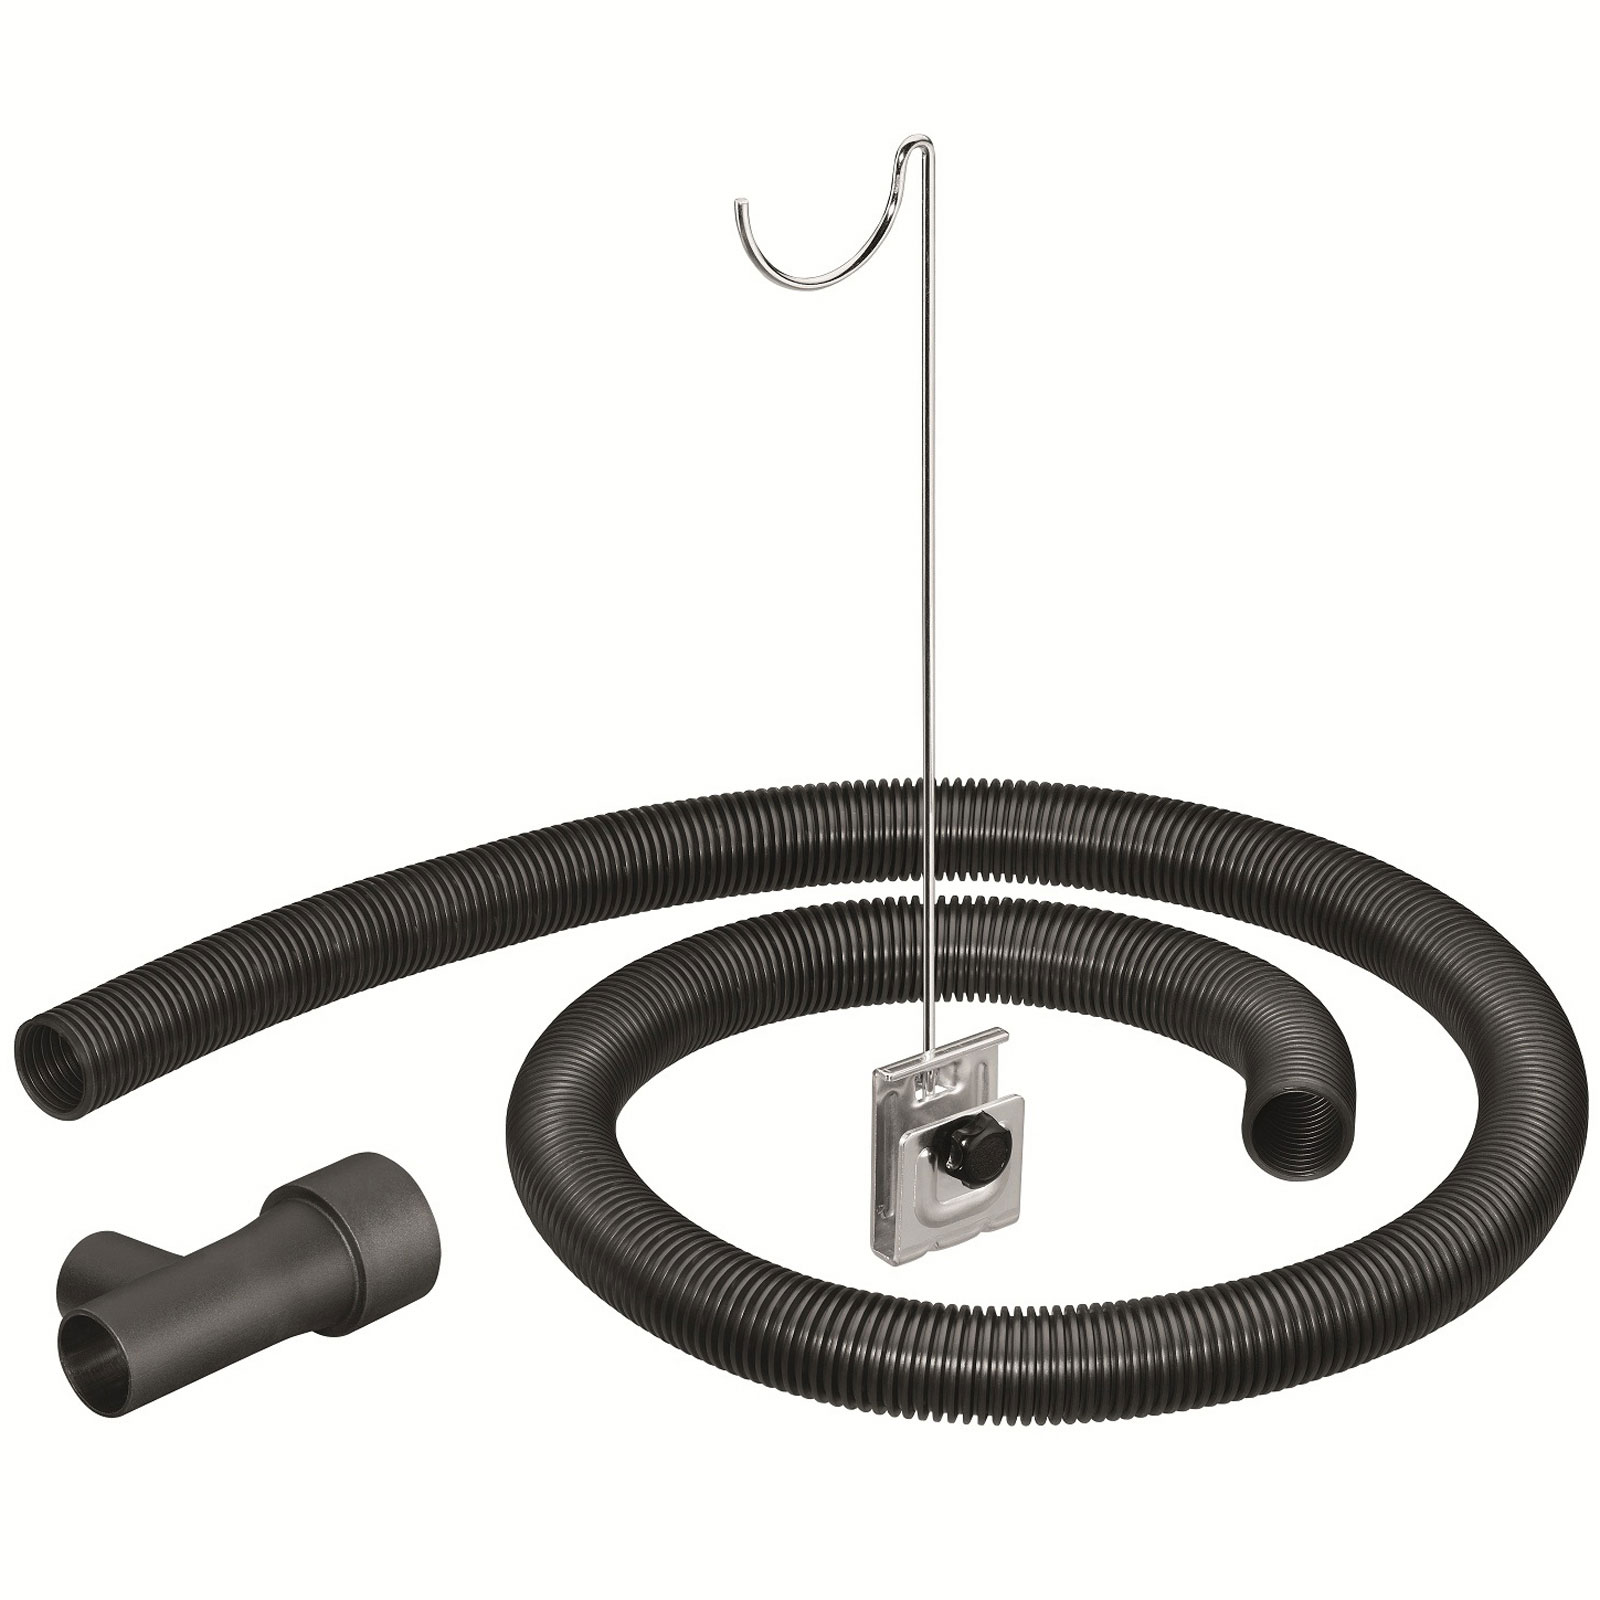 Bosch Table Saw Dust Hose Kit for GTS 10 J & GTS 10 XS Table Saws